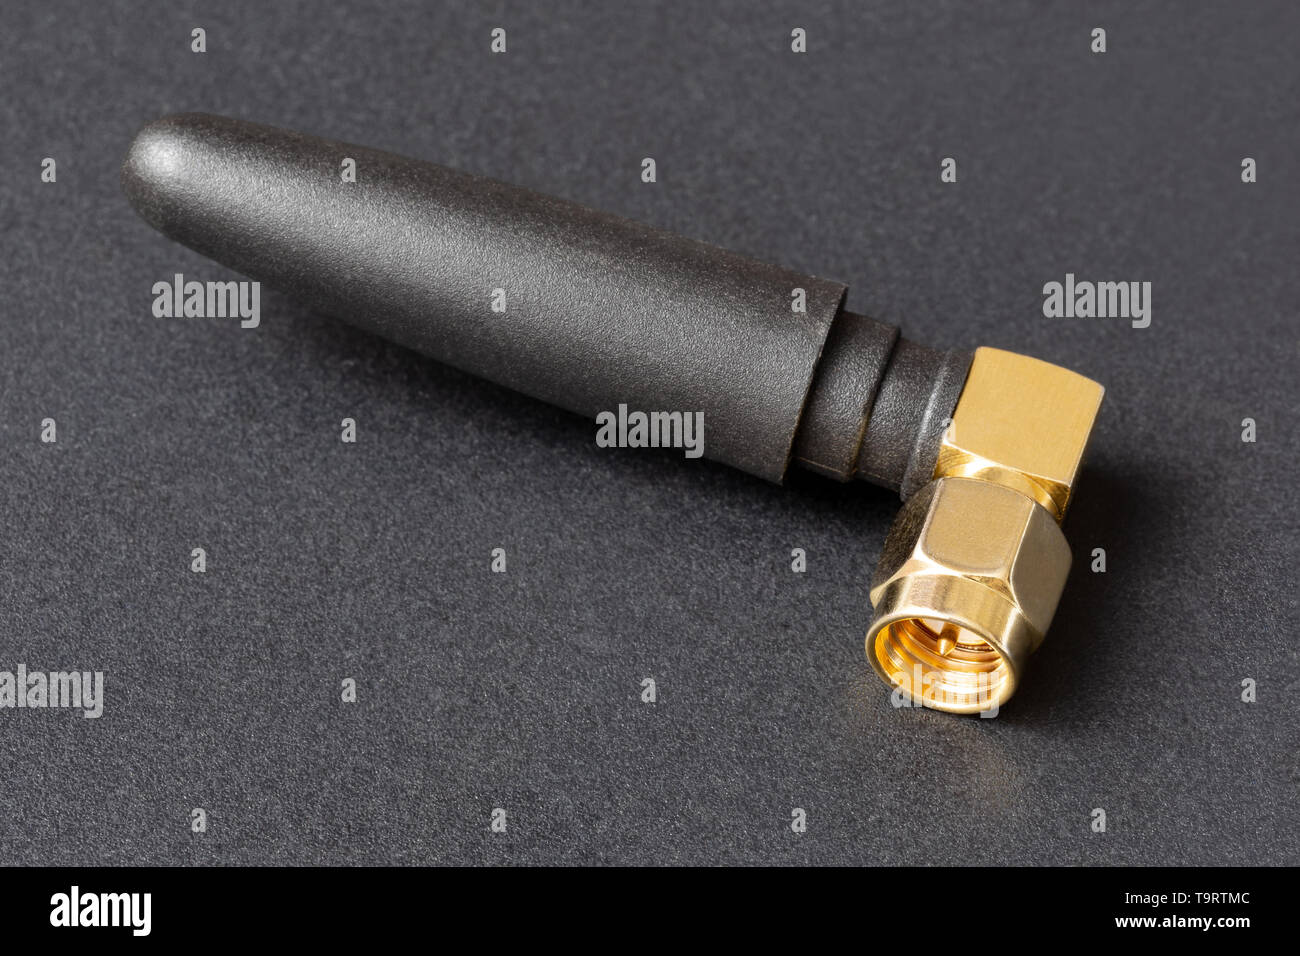 compact Wi-Fi antenna with gold-plated plug on a dark background Stock Photo